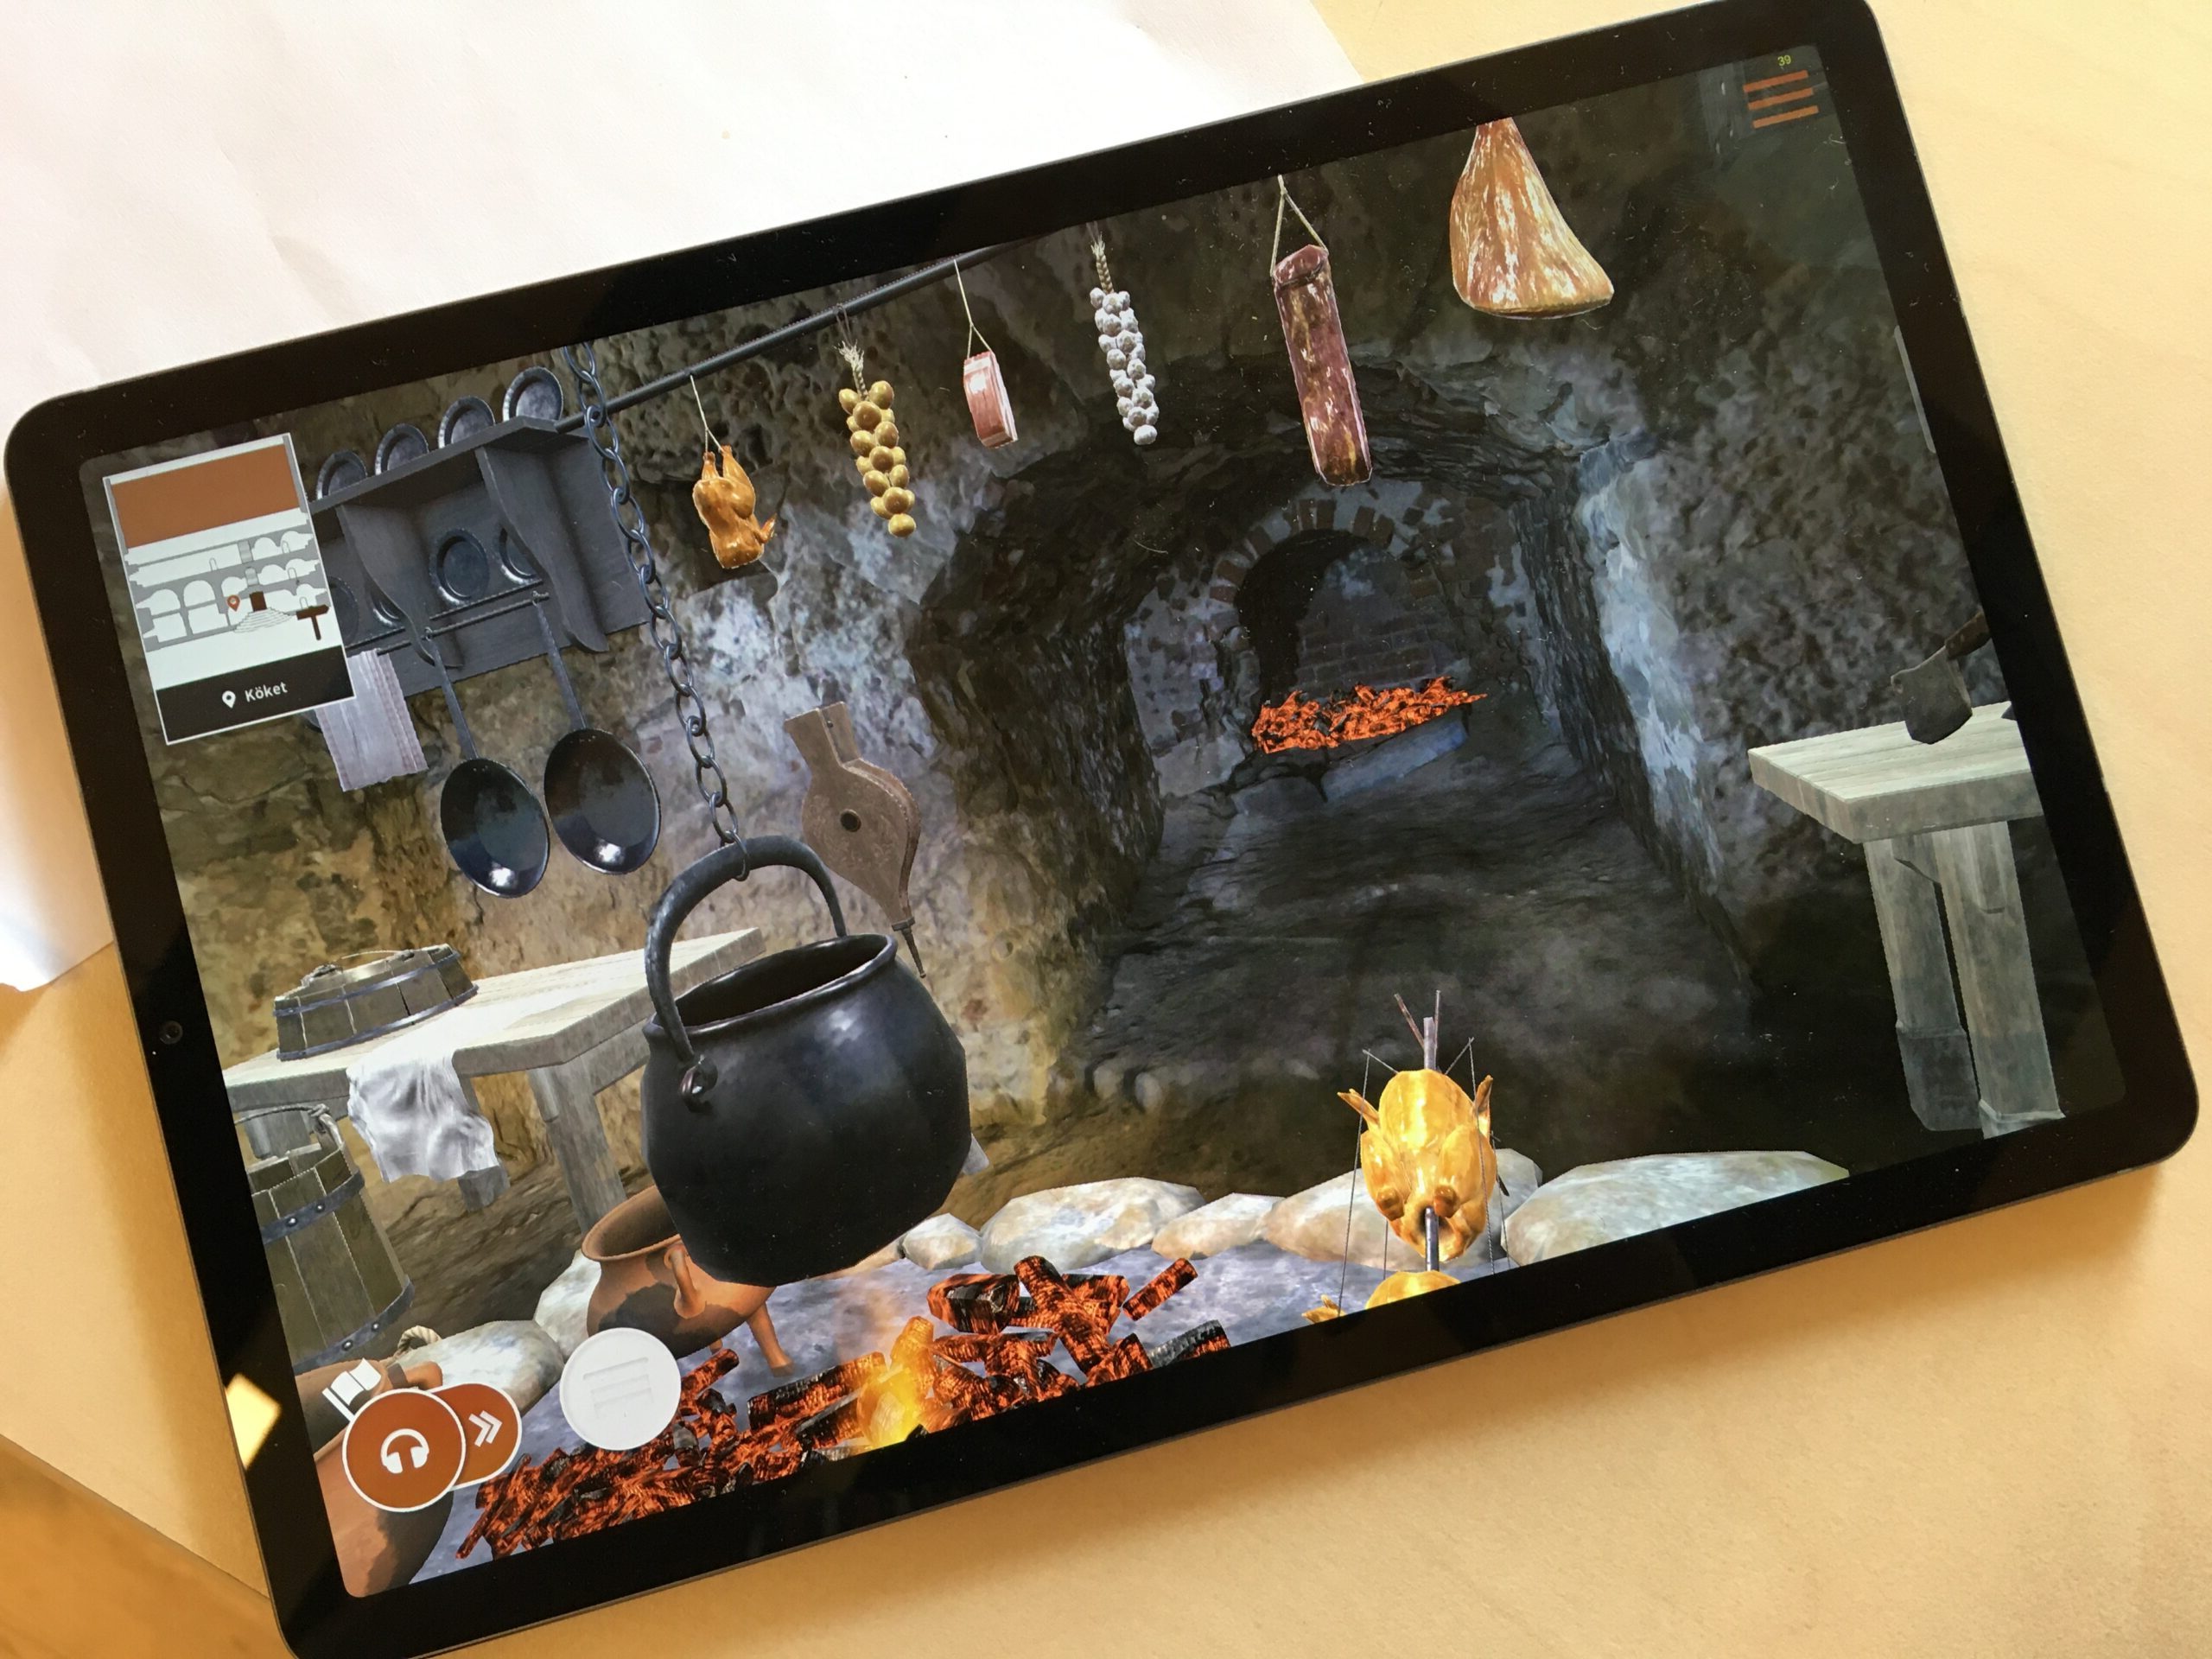 A tablet shows a 3D model of the castle's kitchen, as it might have looked. Onions, chicken and ham hang from a pole in the ceiling. A pot hangs over a glowing hearth.